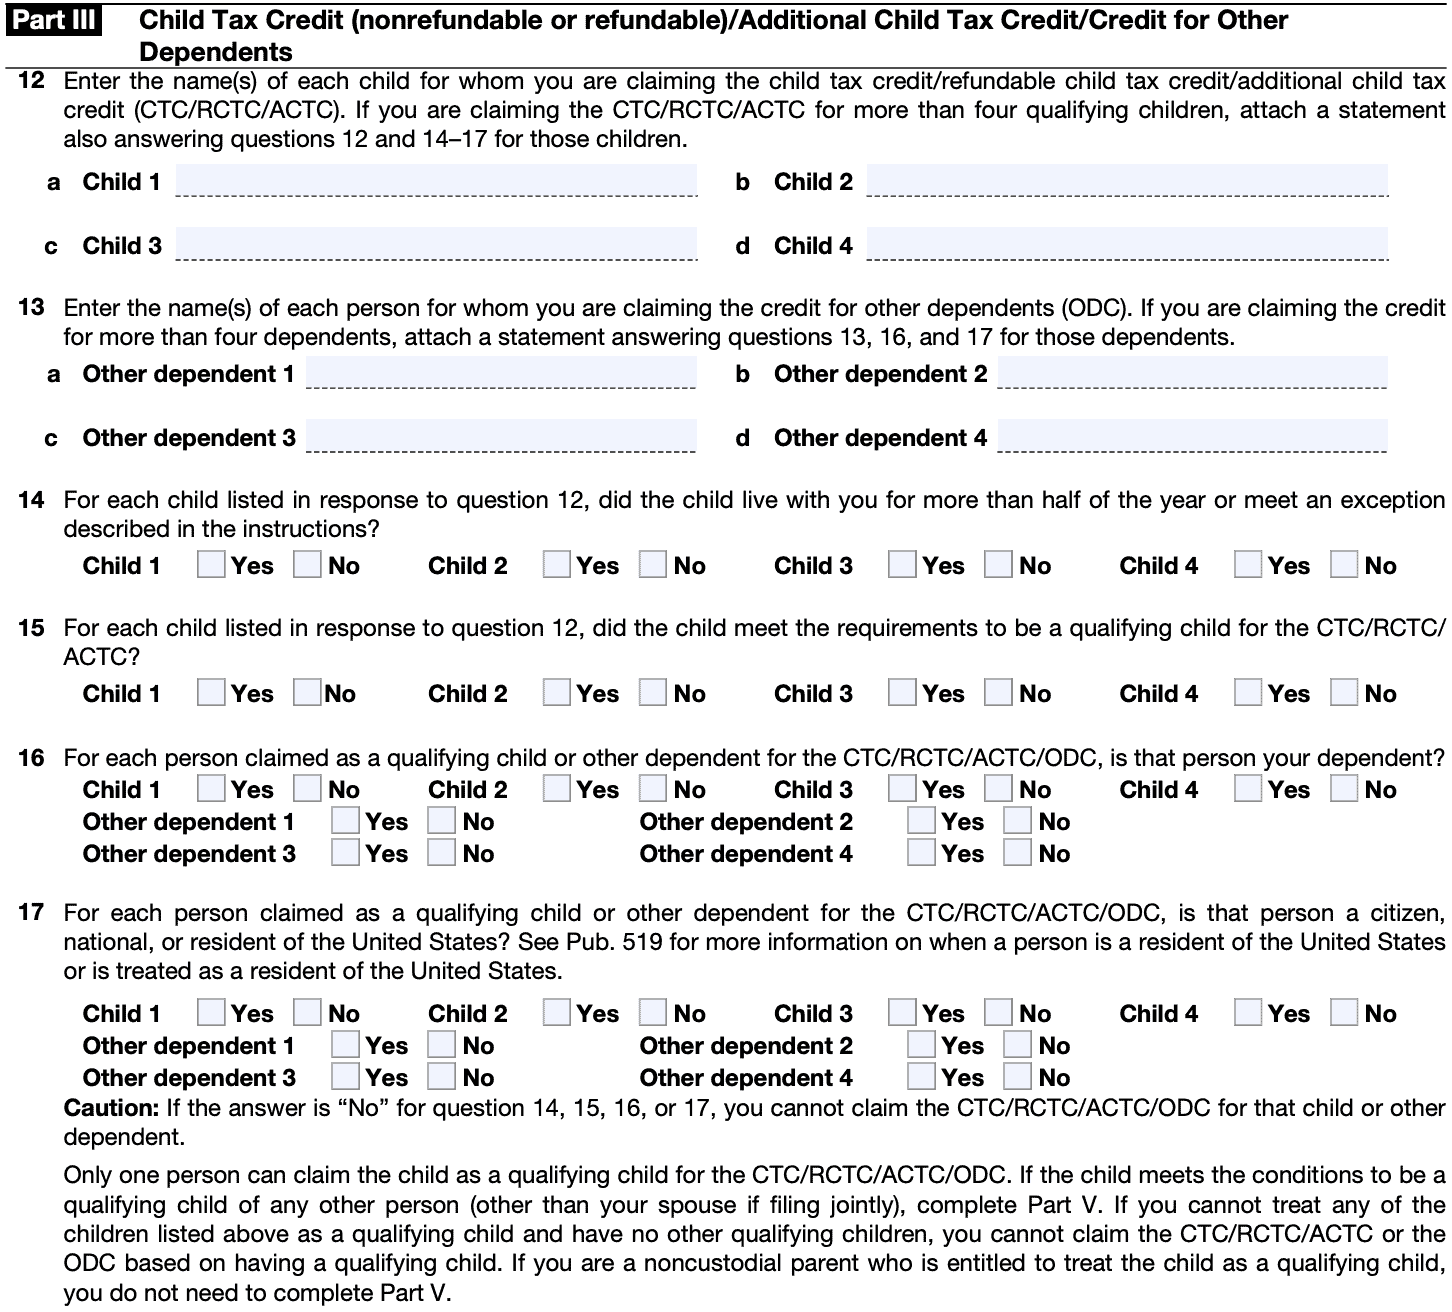 irs form 8862: part III: child tax credit, additional child tax credit, or credit for other dependents